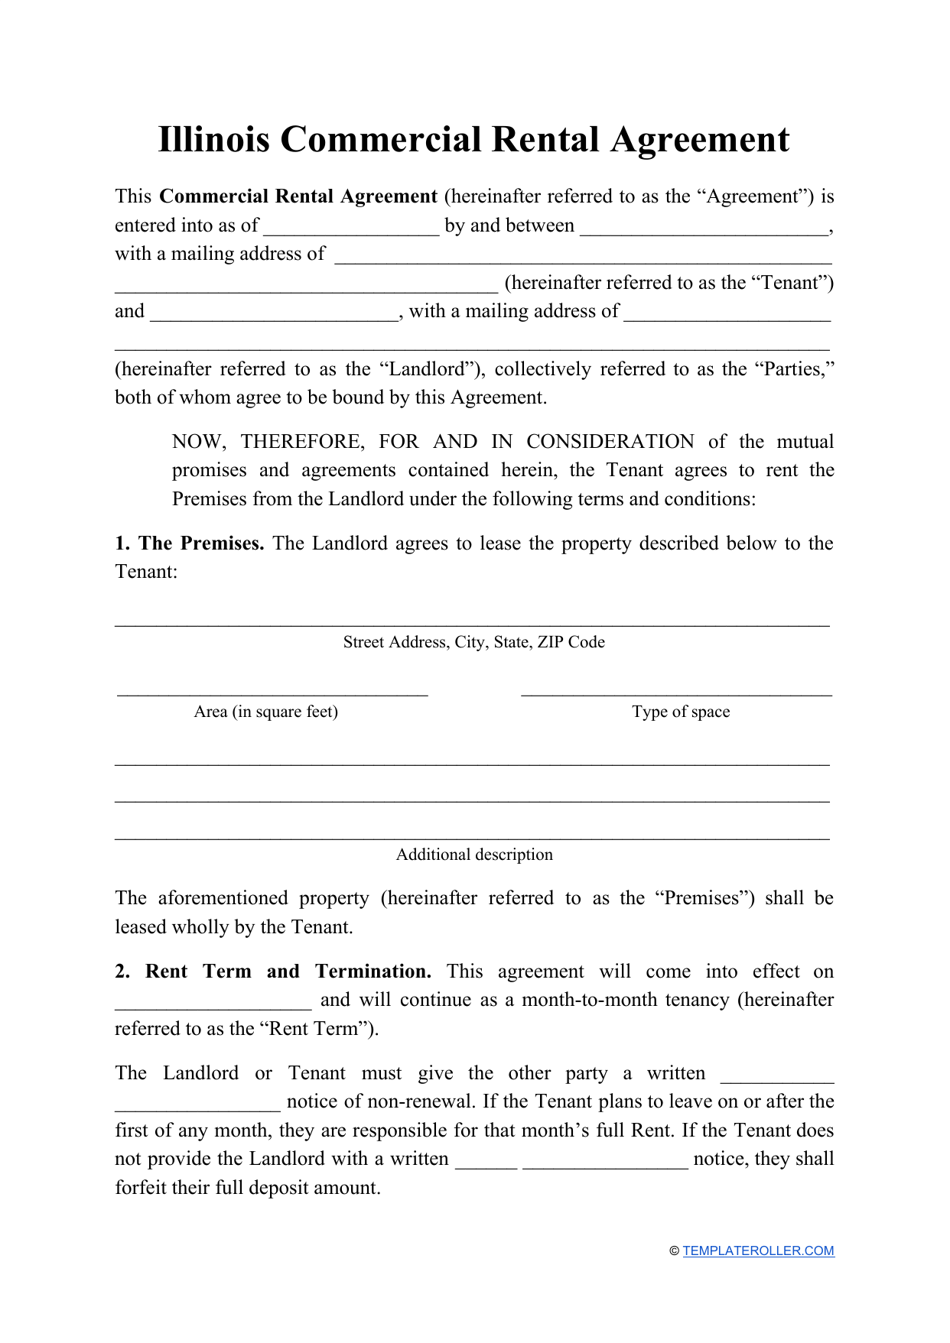 Illinois Commercial Rental Agreement Template Fill Out, Sign Online